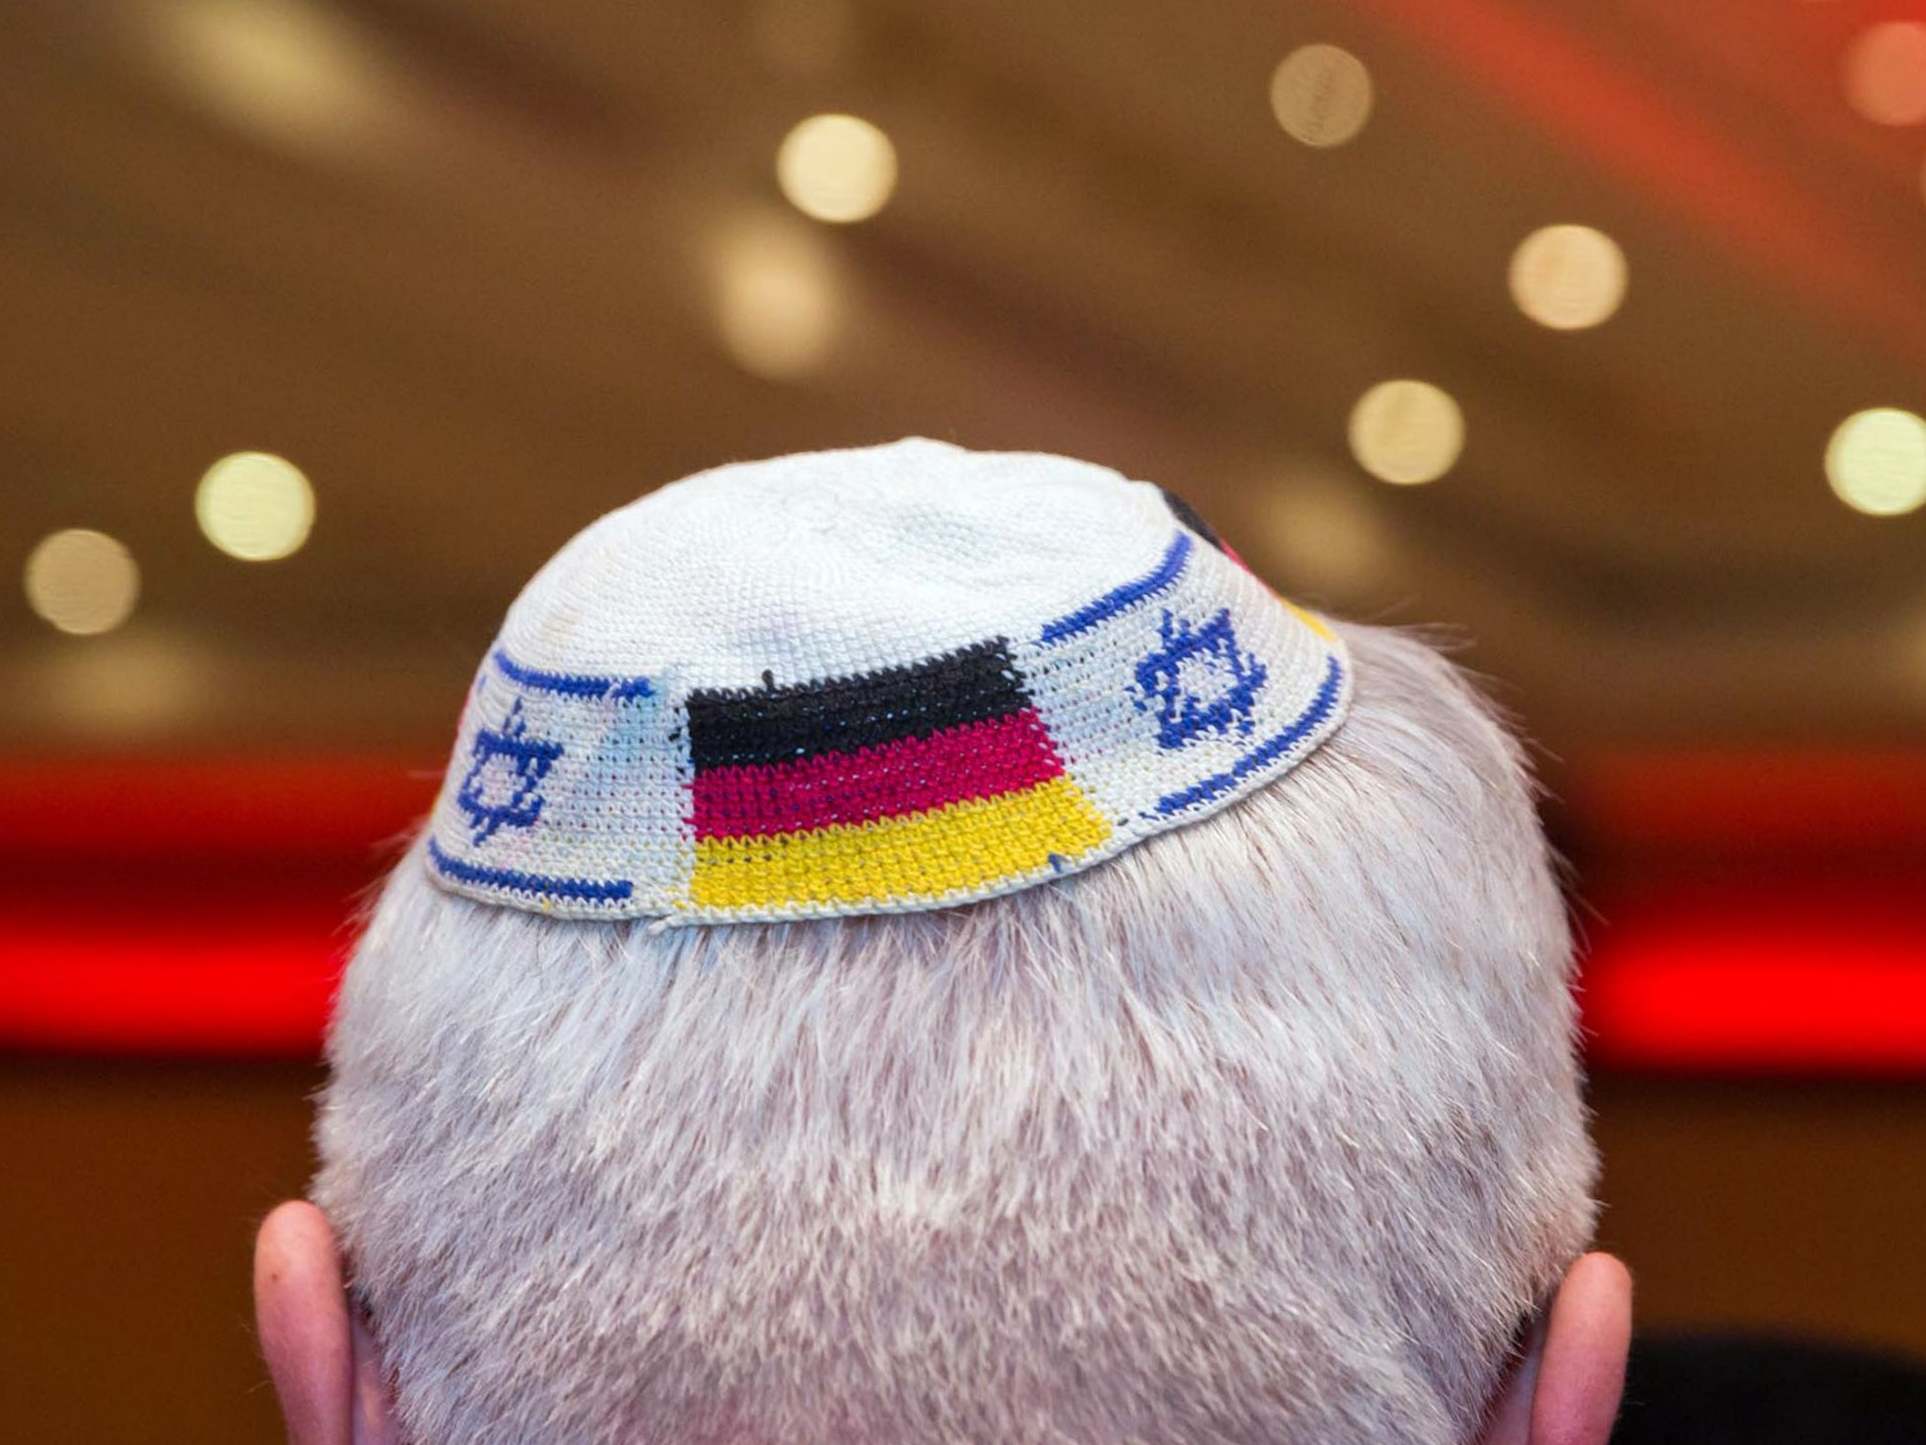 A man wears a Jewish skullcap with the flags of Germany and Israel